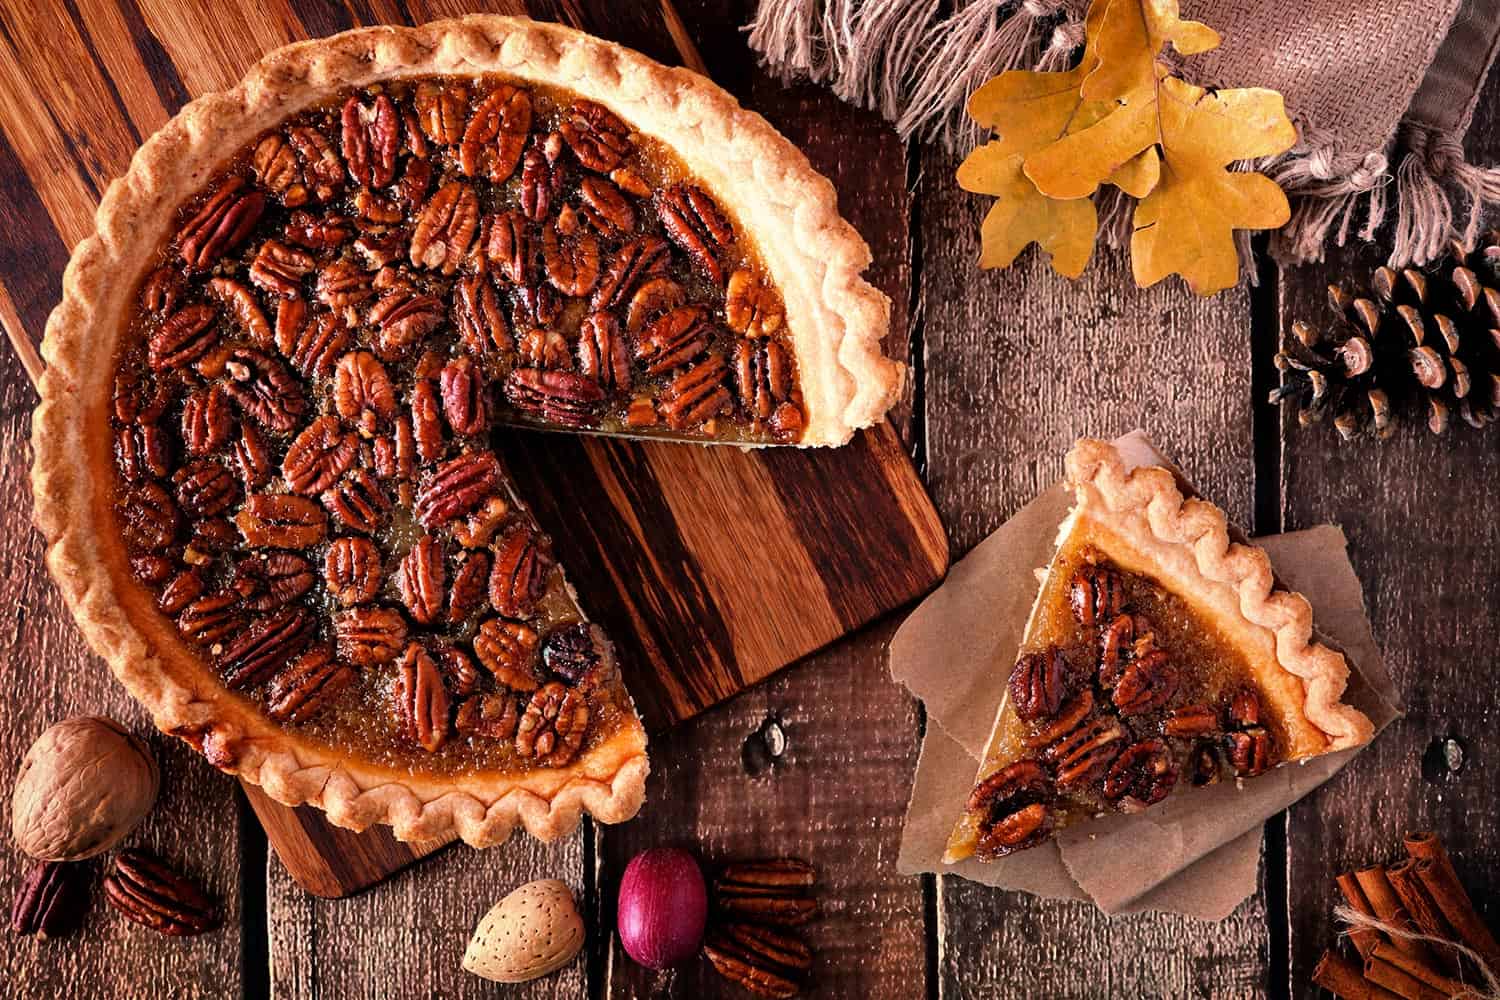 Pecan pie on the wooden table